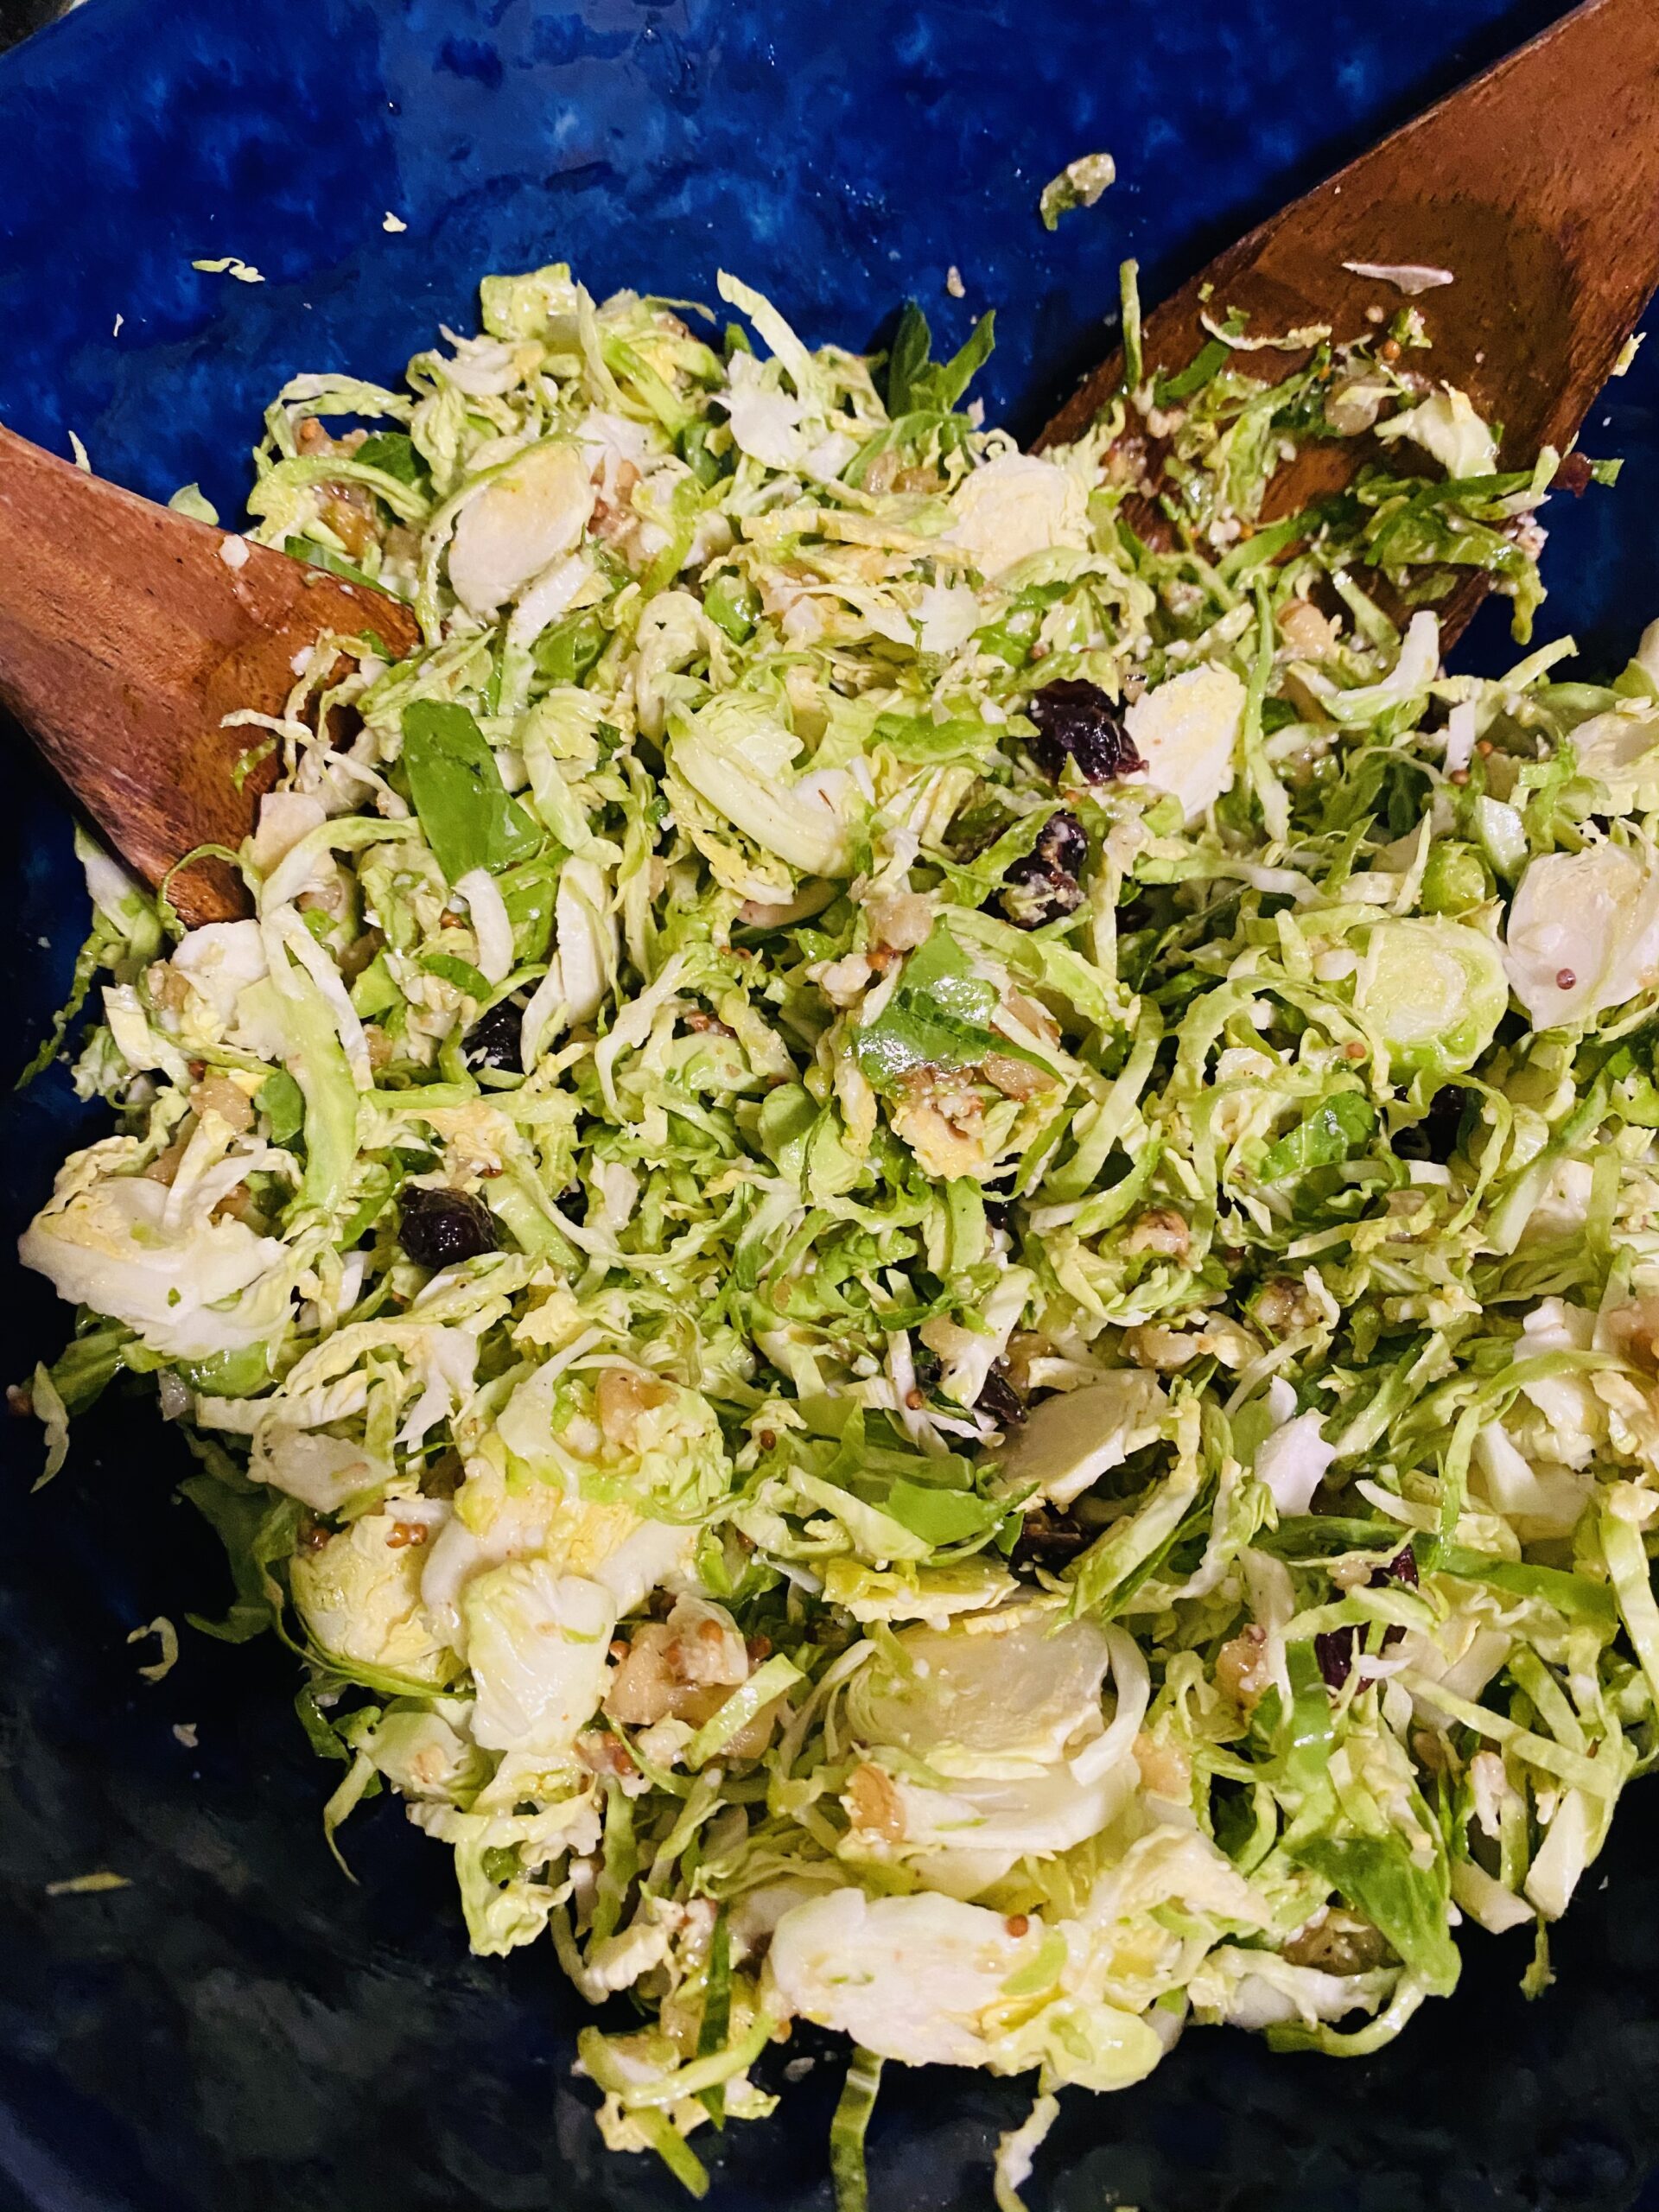 Shaved Brussel Sprout Salad with Mustard Dressing ready to be enjoyed.